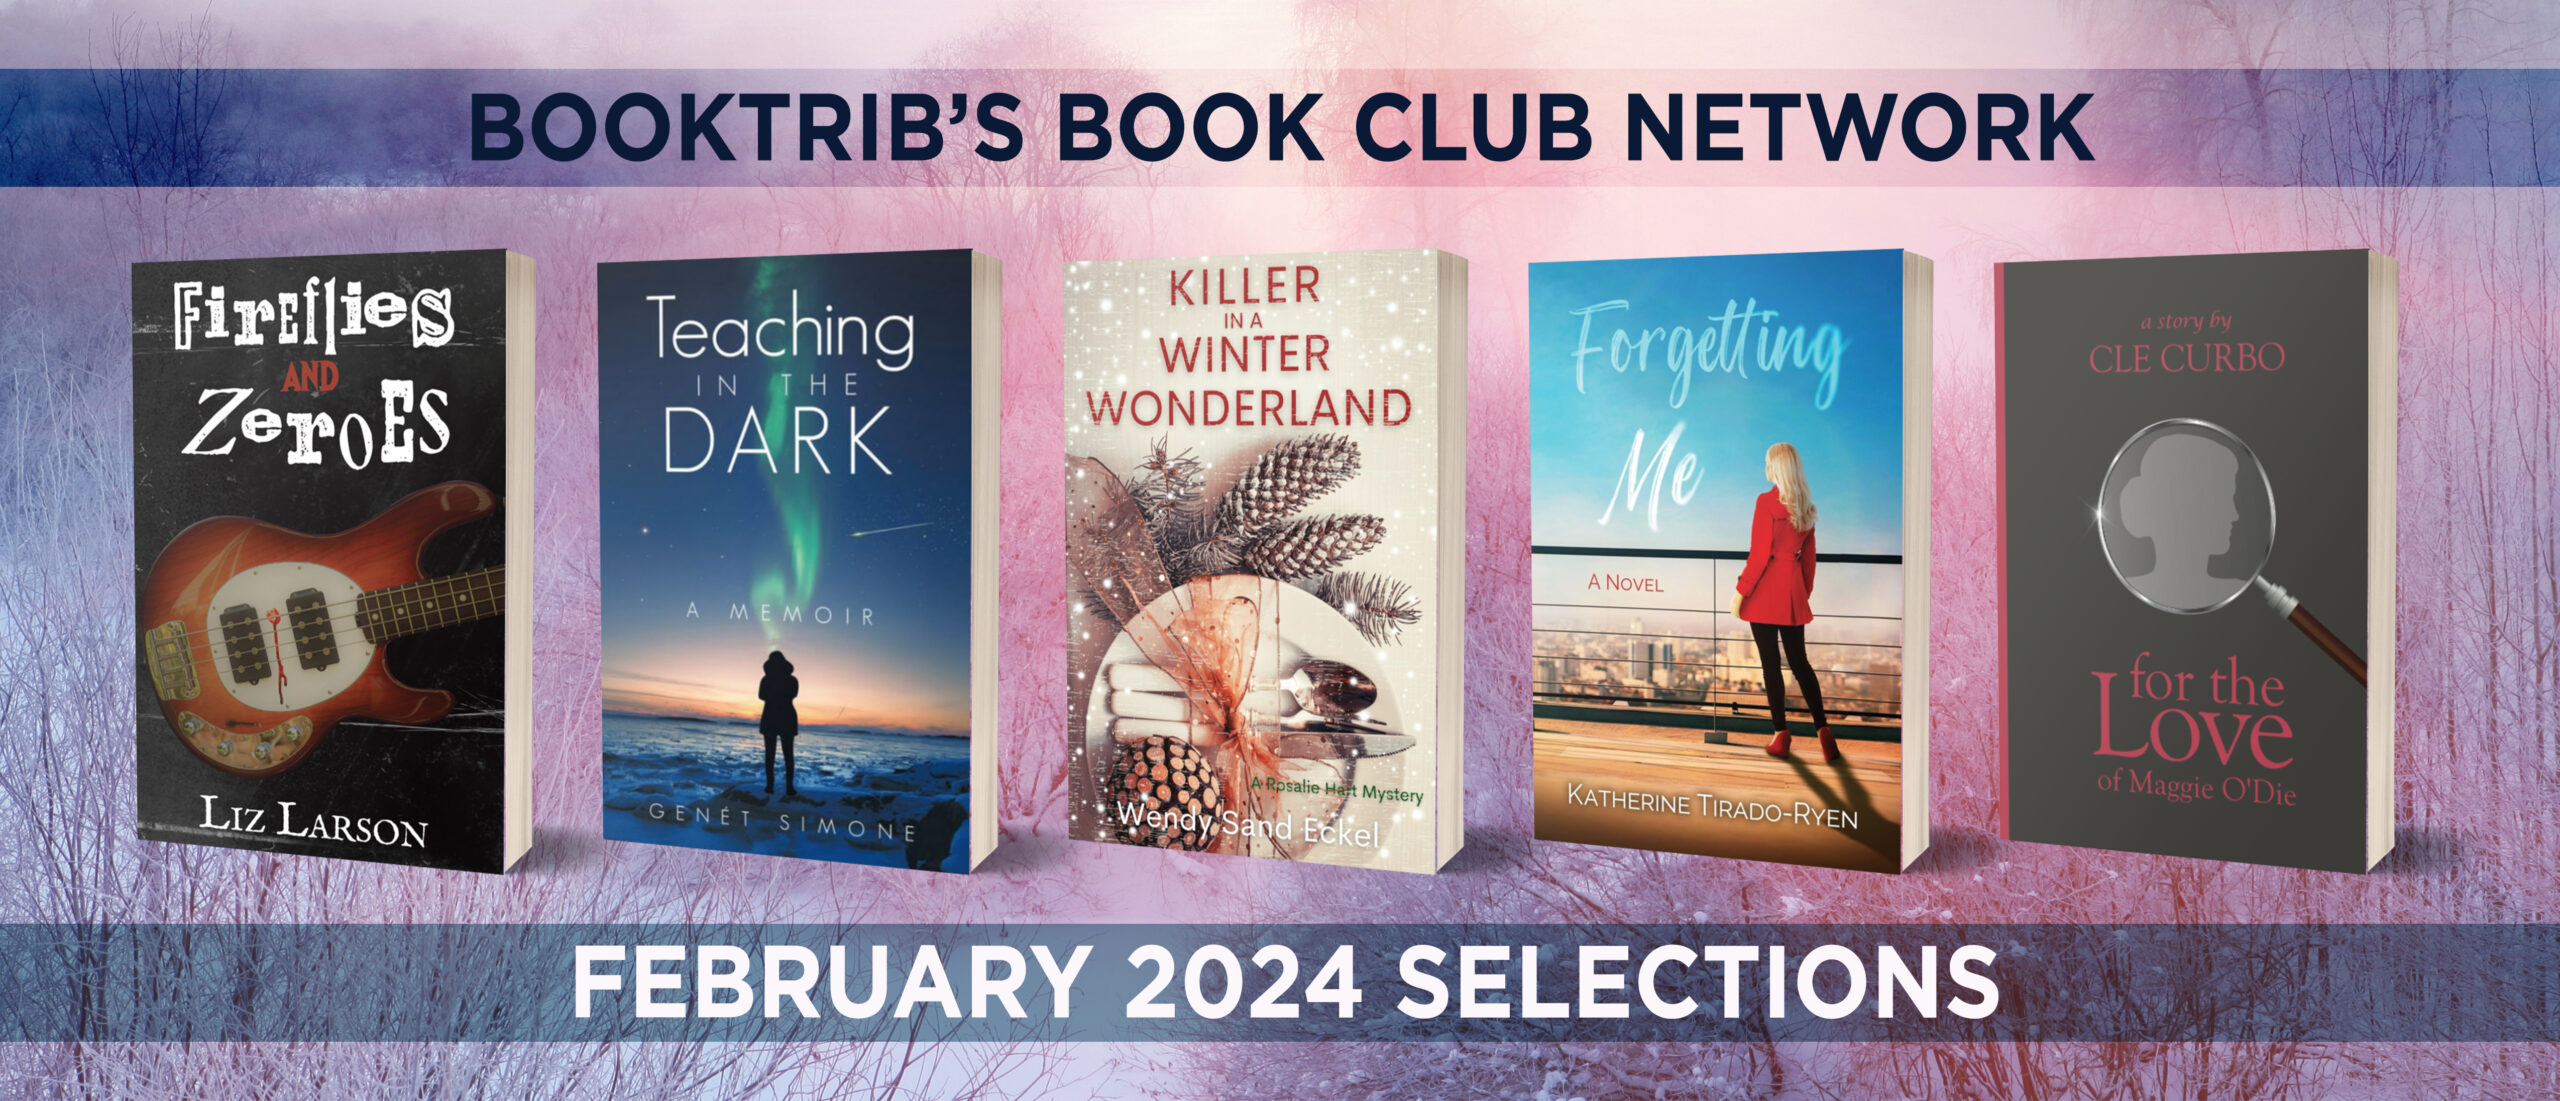 BookTrib's February 2024 Selections